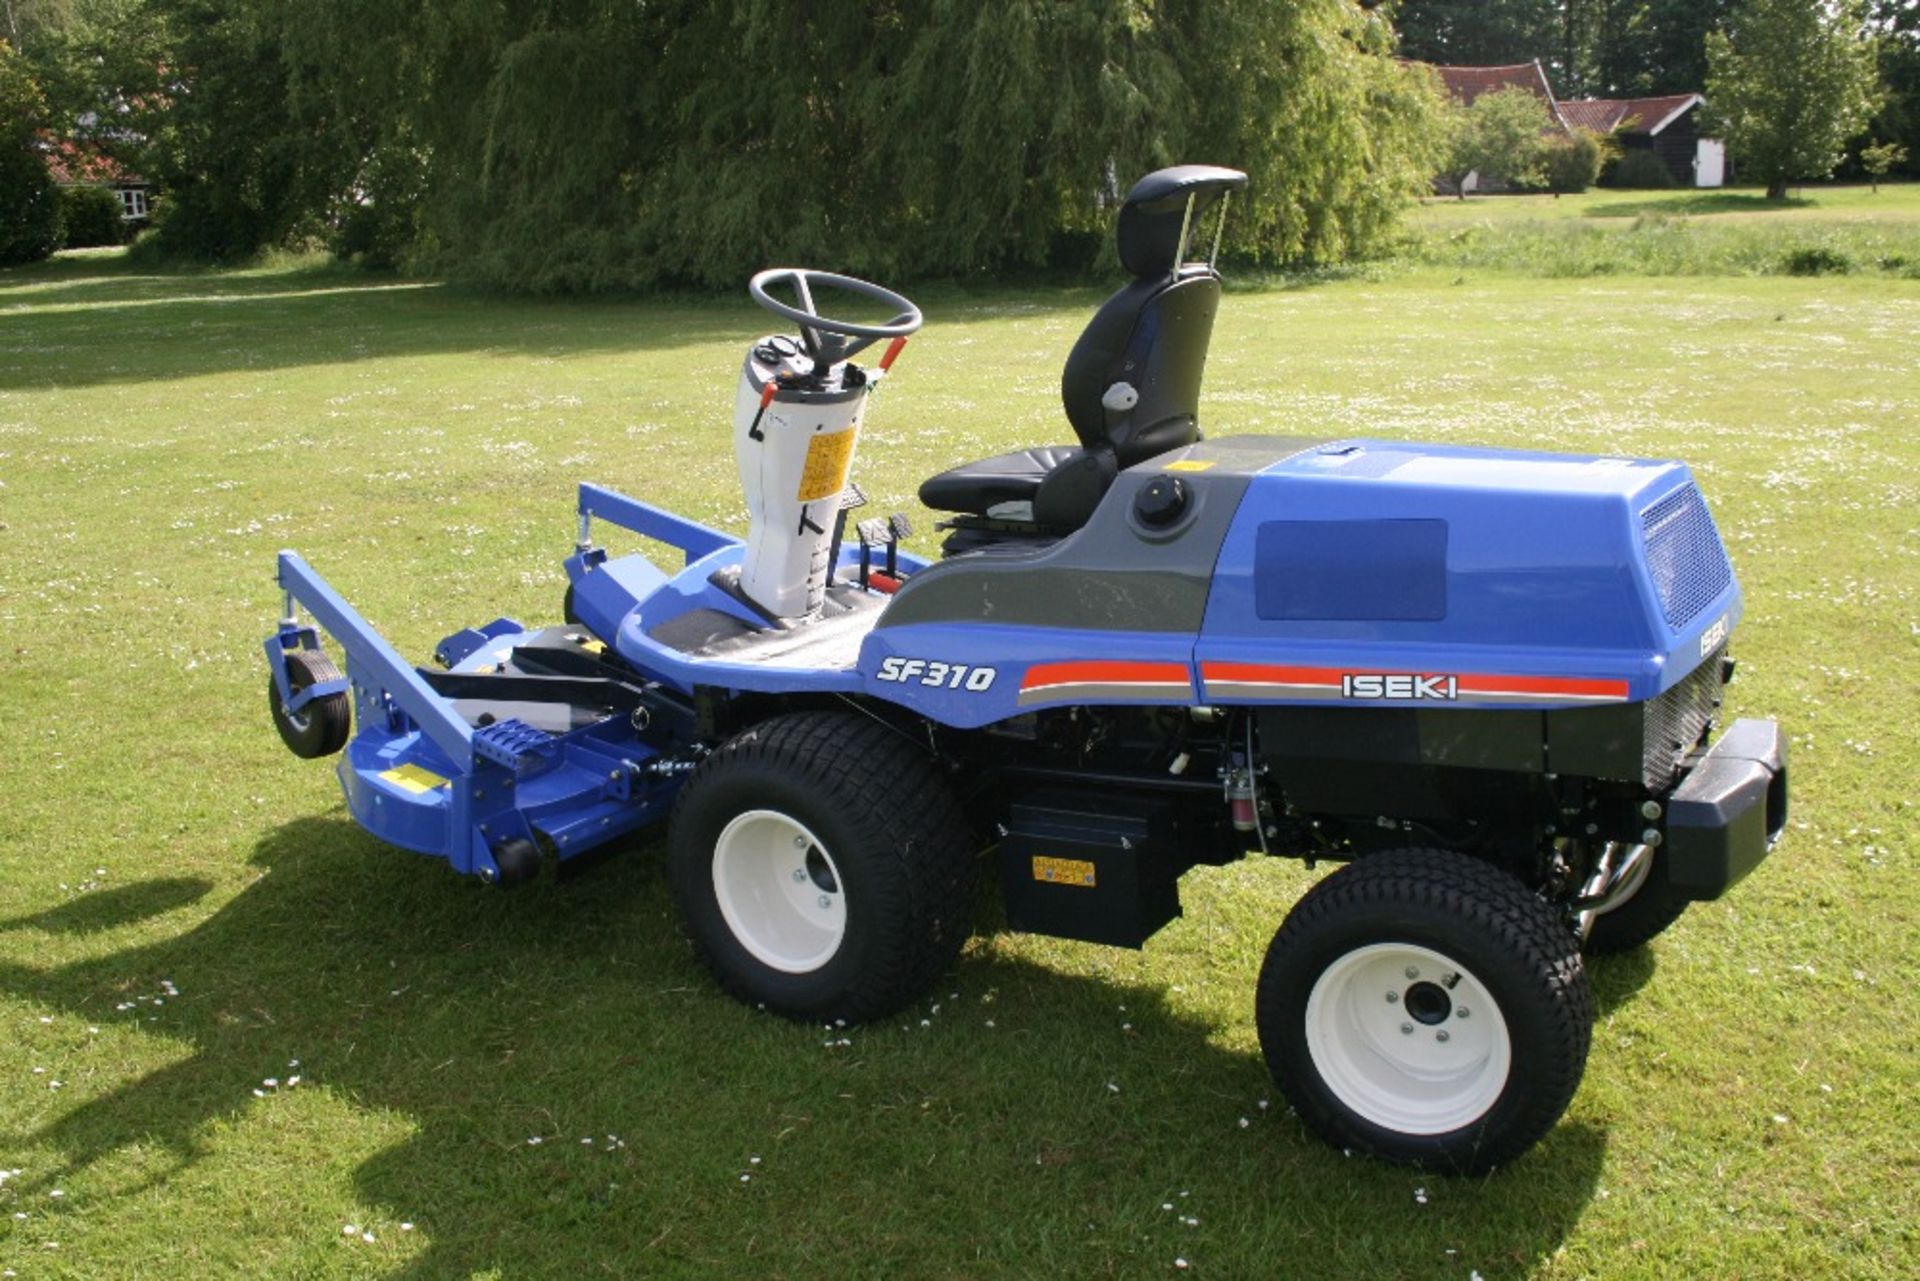 Iseki SF310 rotary outfront mower - Image 9 of 20